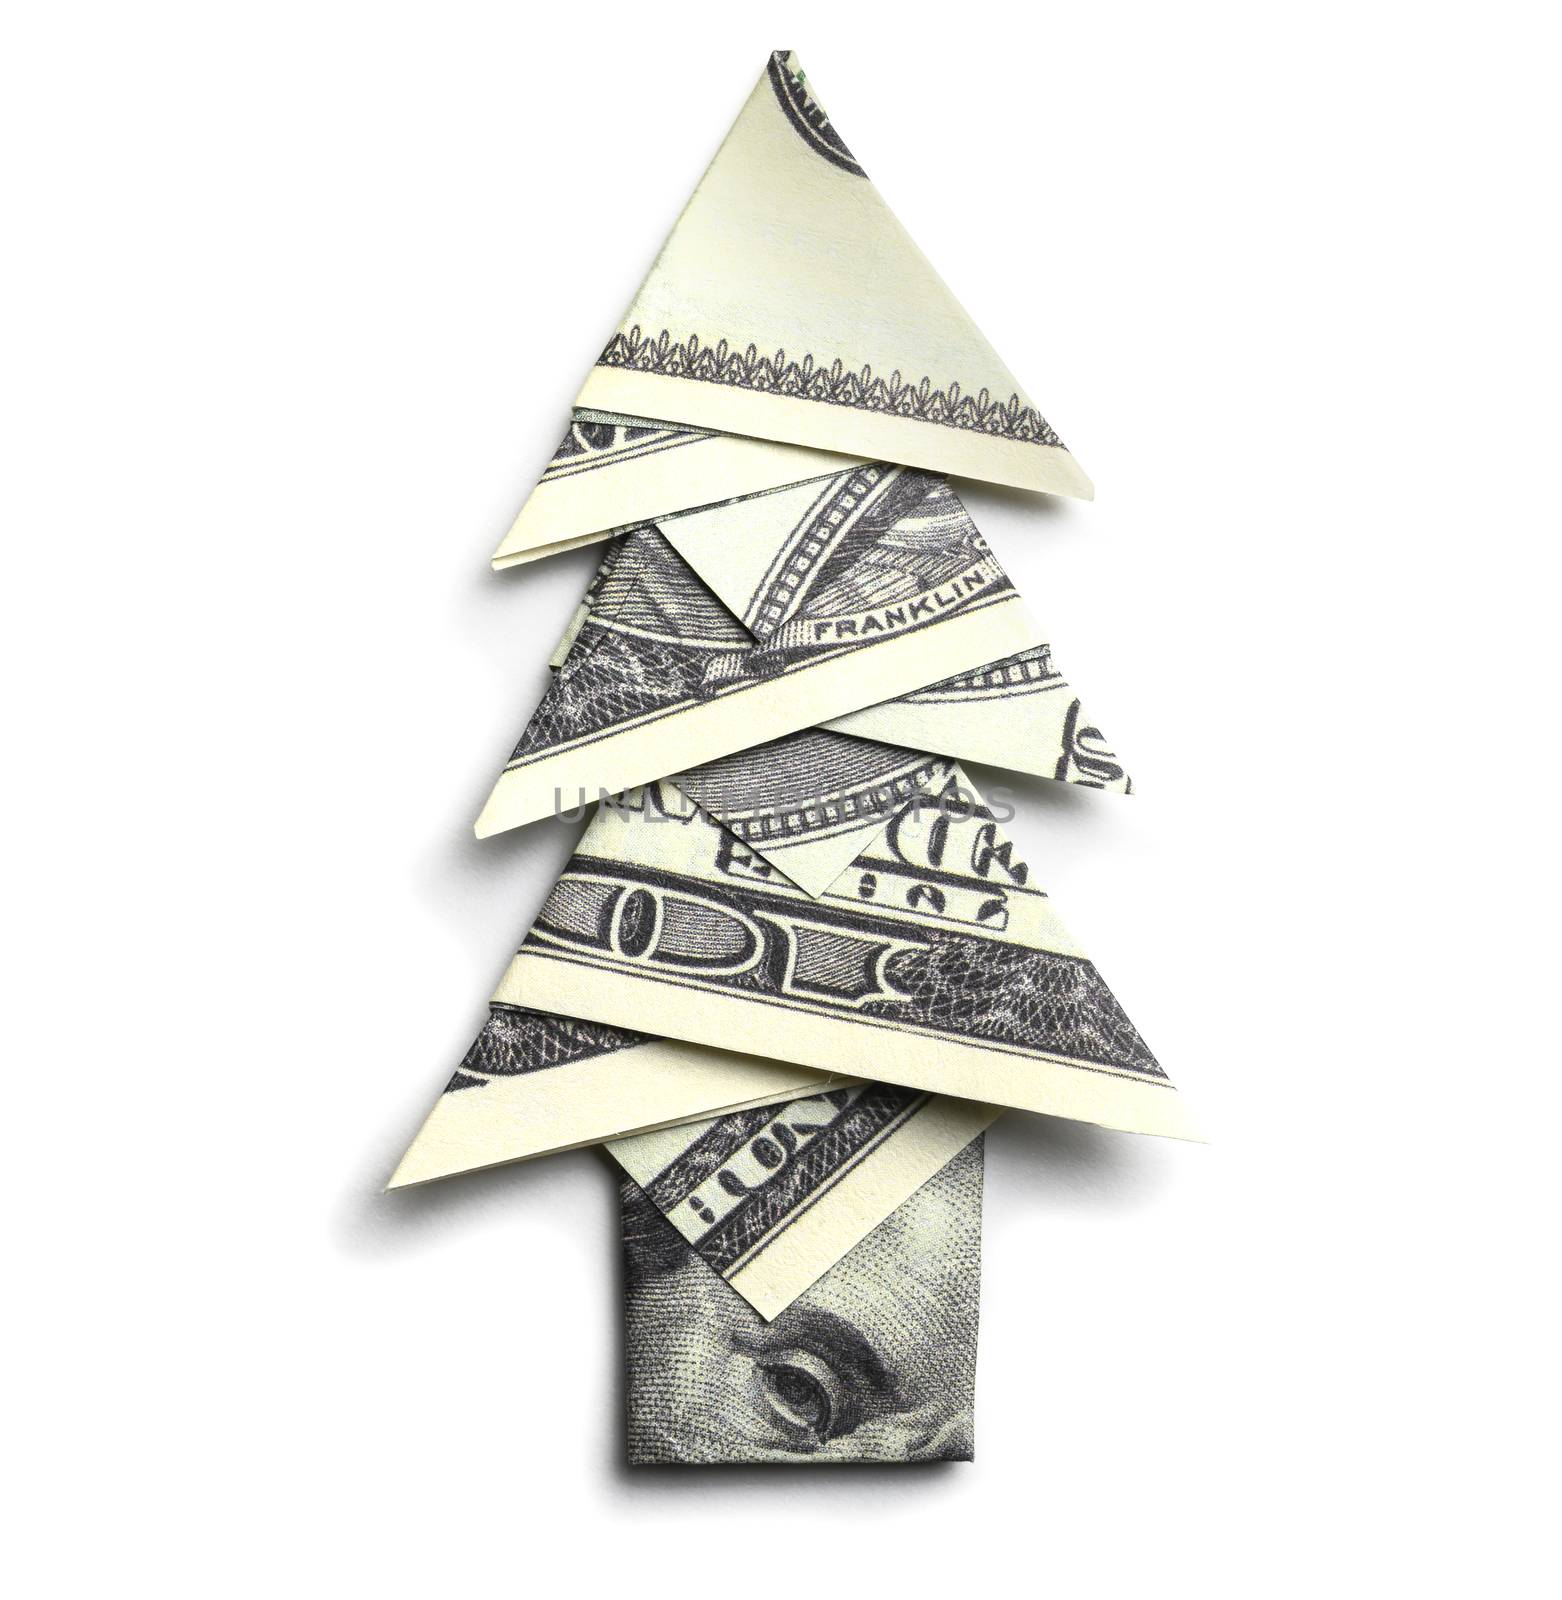 100 us dollars in the shape of a Christmas tree on a white background by butenkow